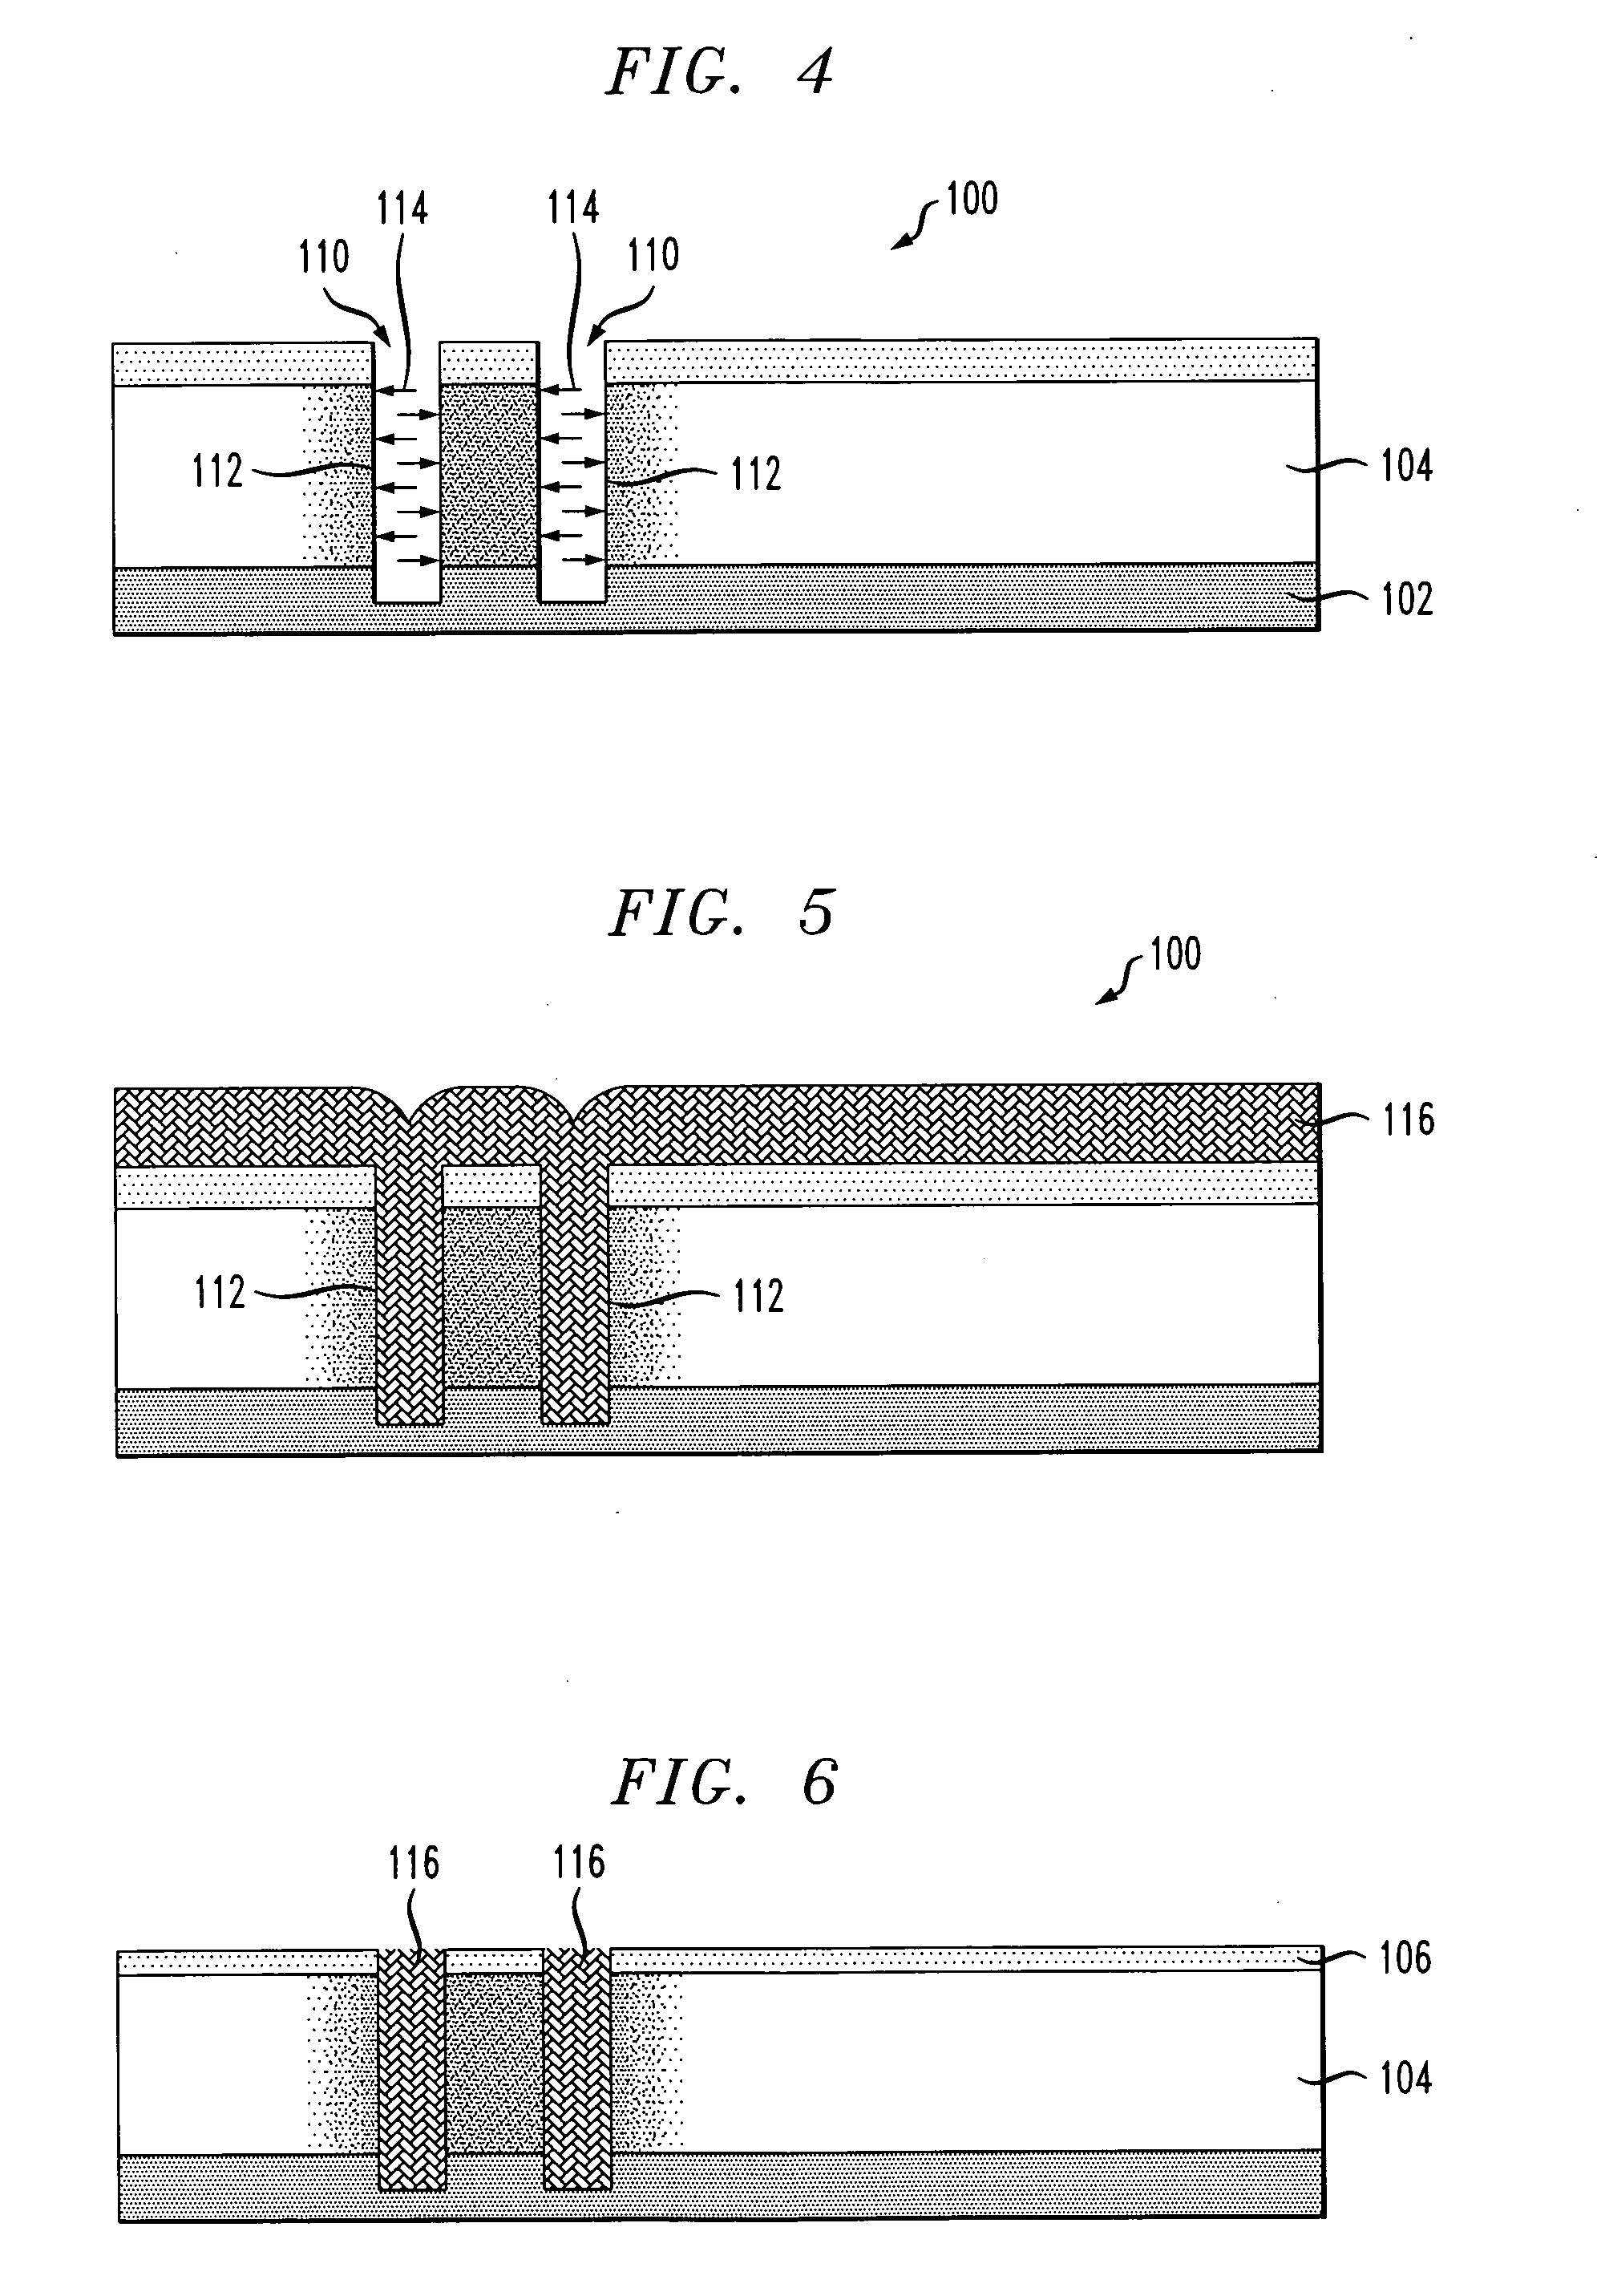 Enhanced substrate contact for a semiconductor device